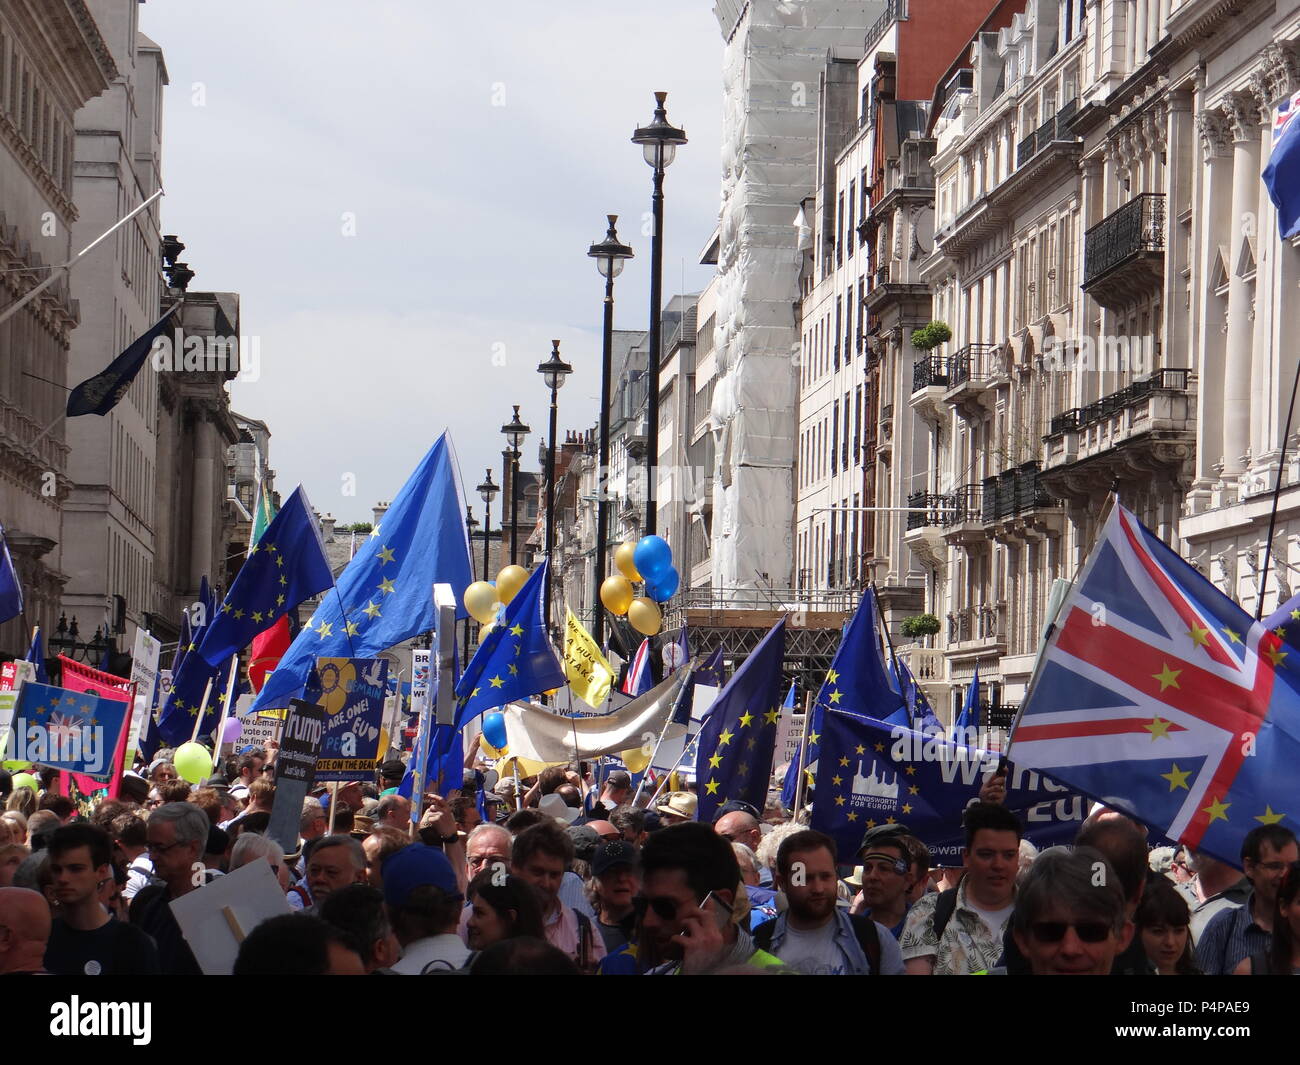 London, UK. 23rd June 2018. Thousands joined Anti-Brexit protest People's votes march in London, UK Credit: Nastia M/Alamy Live News Stock Photo